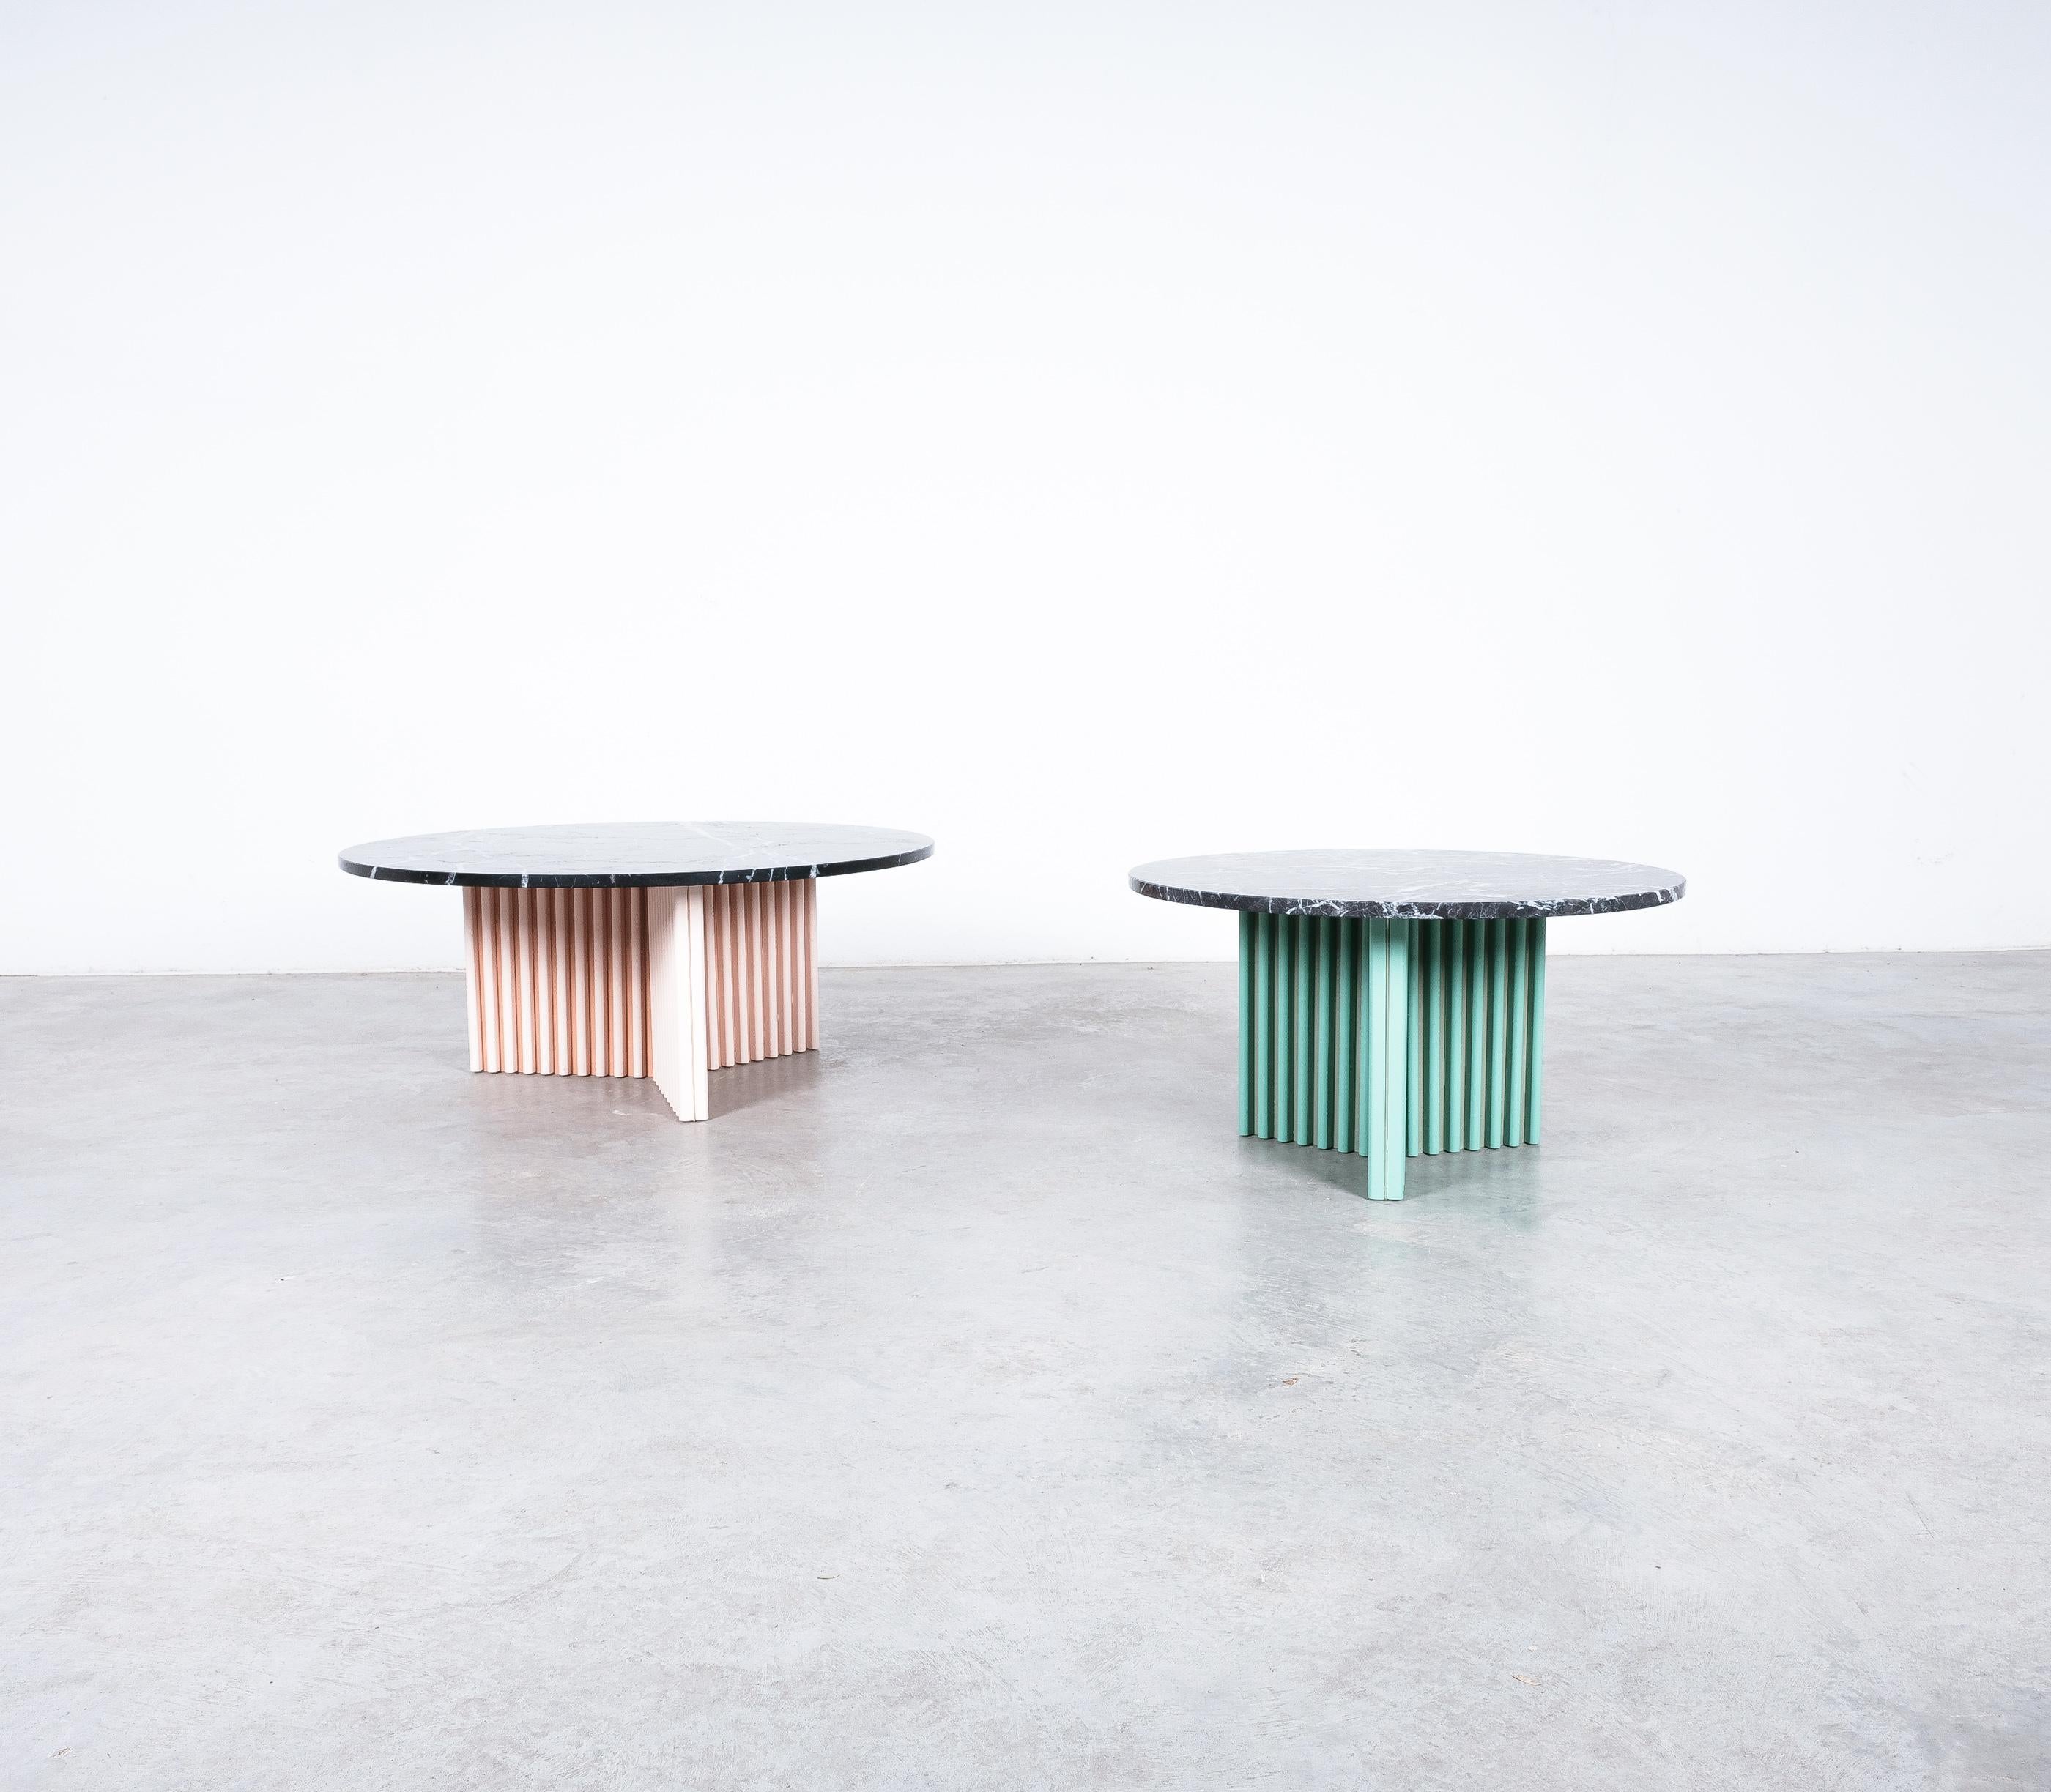 Bespoke Black Marble Carrara Tables Side Tables, France, circa 1990 For Sale 5